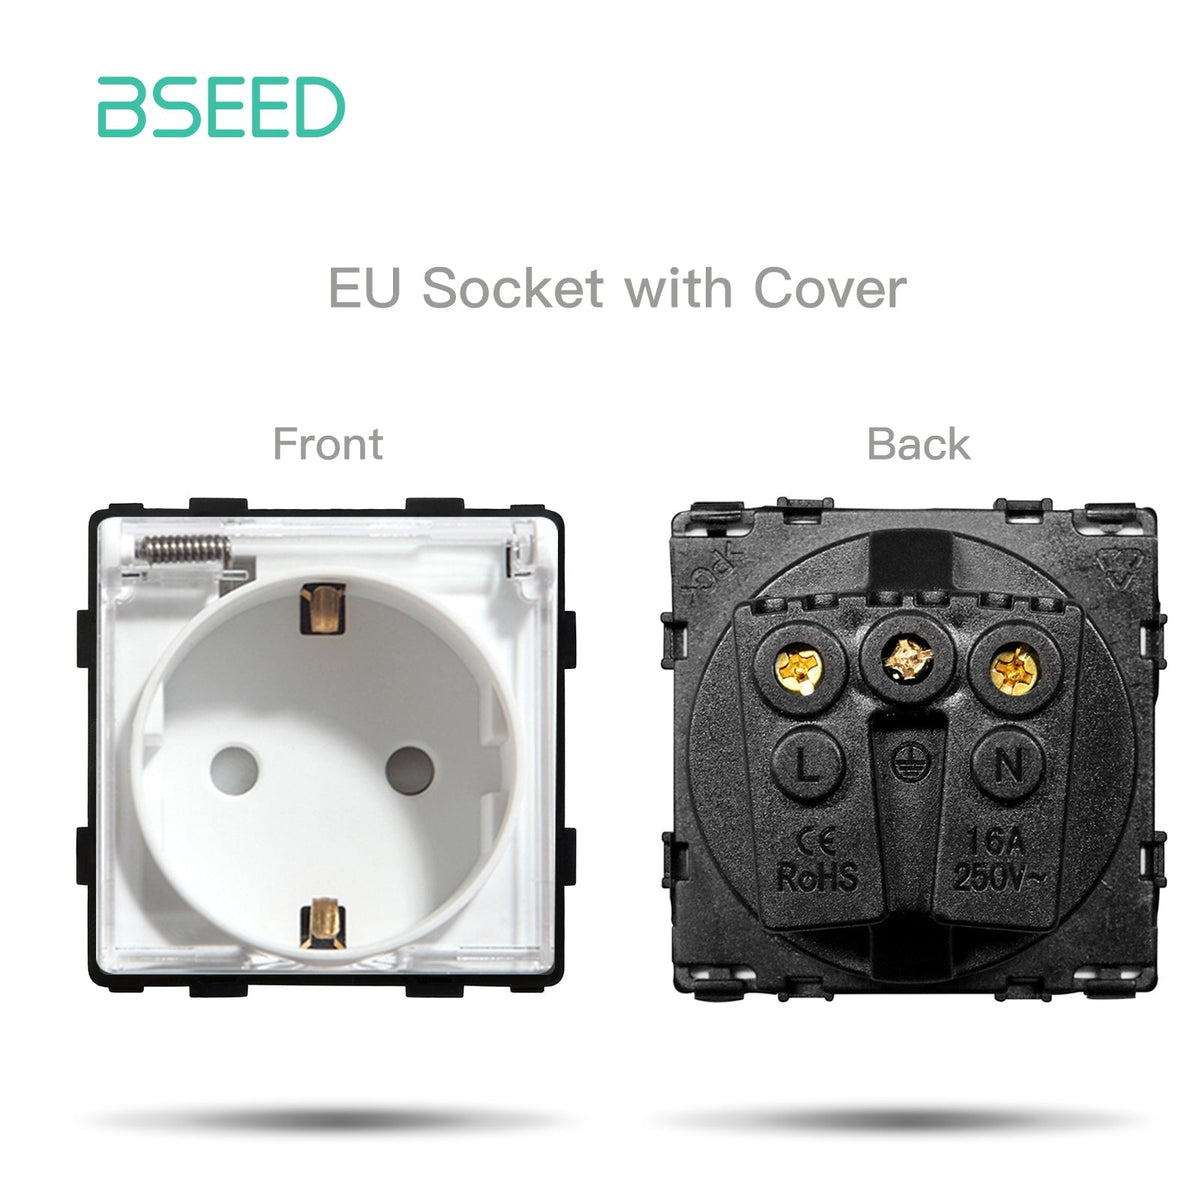 BSEED EU/FR standard Function Key Cover Socket DIY Parts Power Outlets & Sockets Bseedswitch WHITE EU 